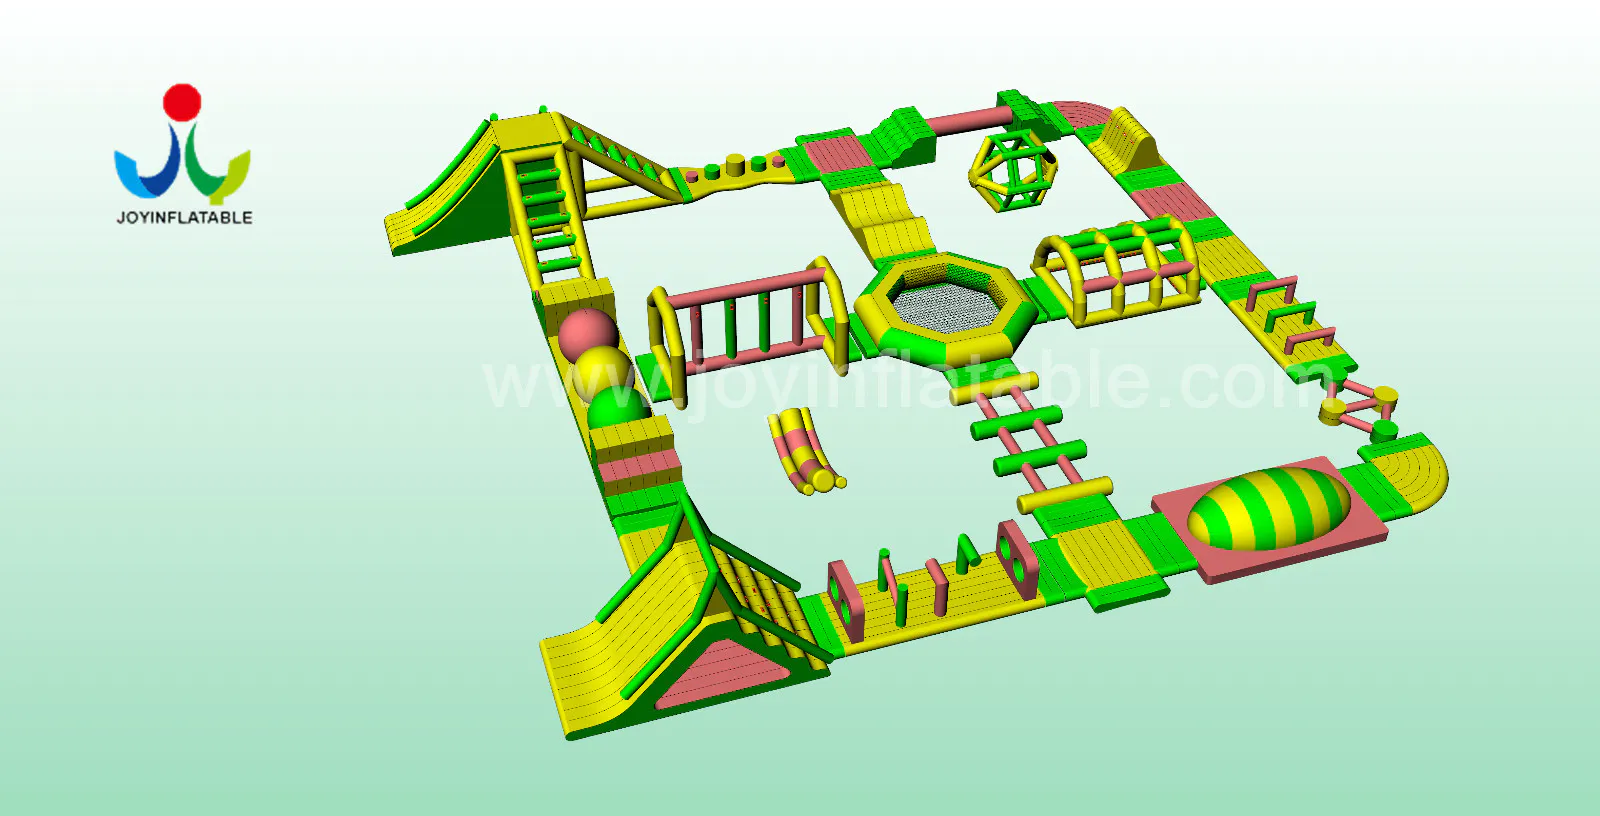 commercial blow up trampoline supplier for children